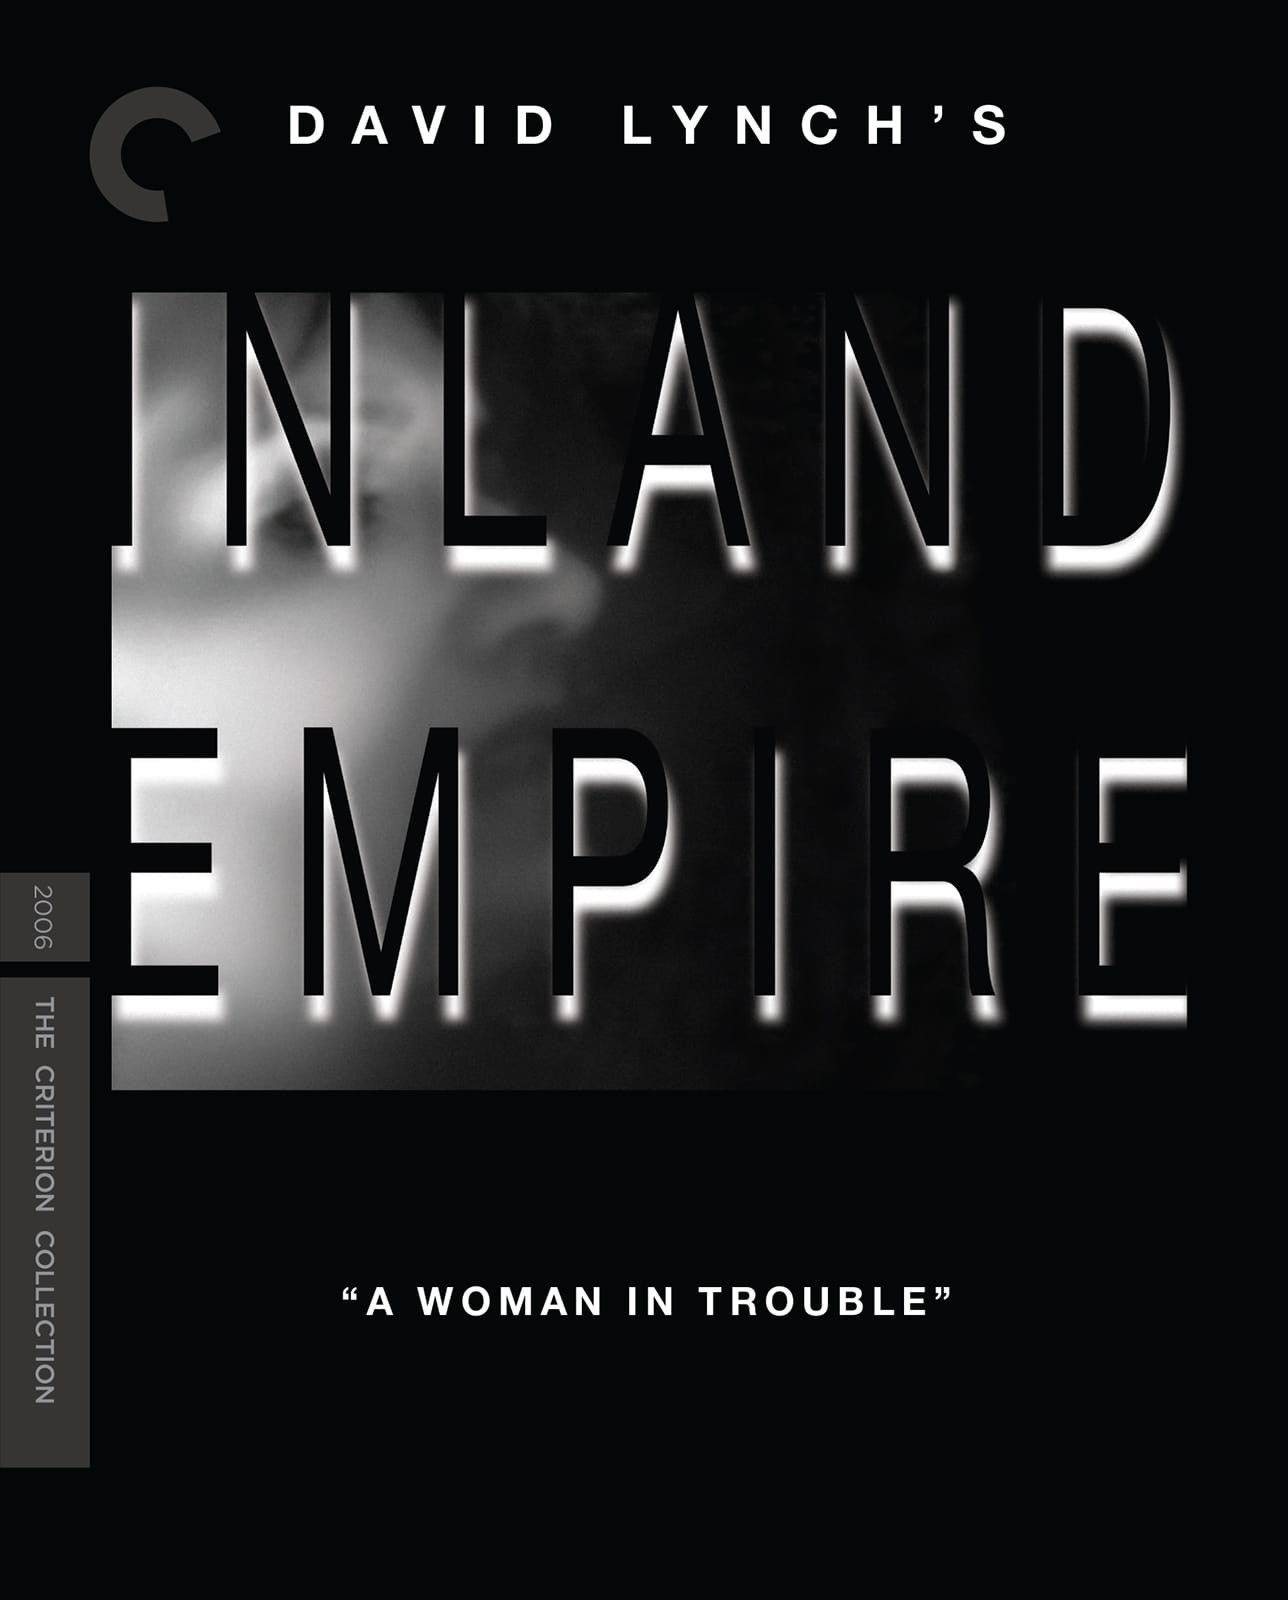 Criterion March Releases Include Inland Empire, Mildred Pierce